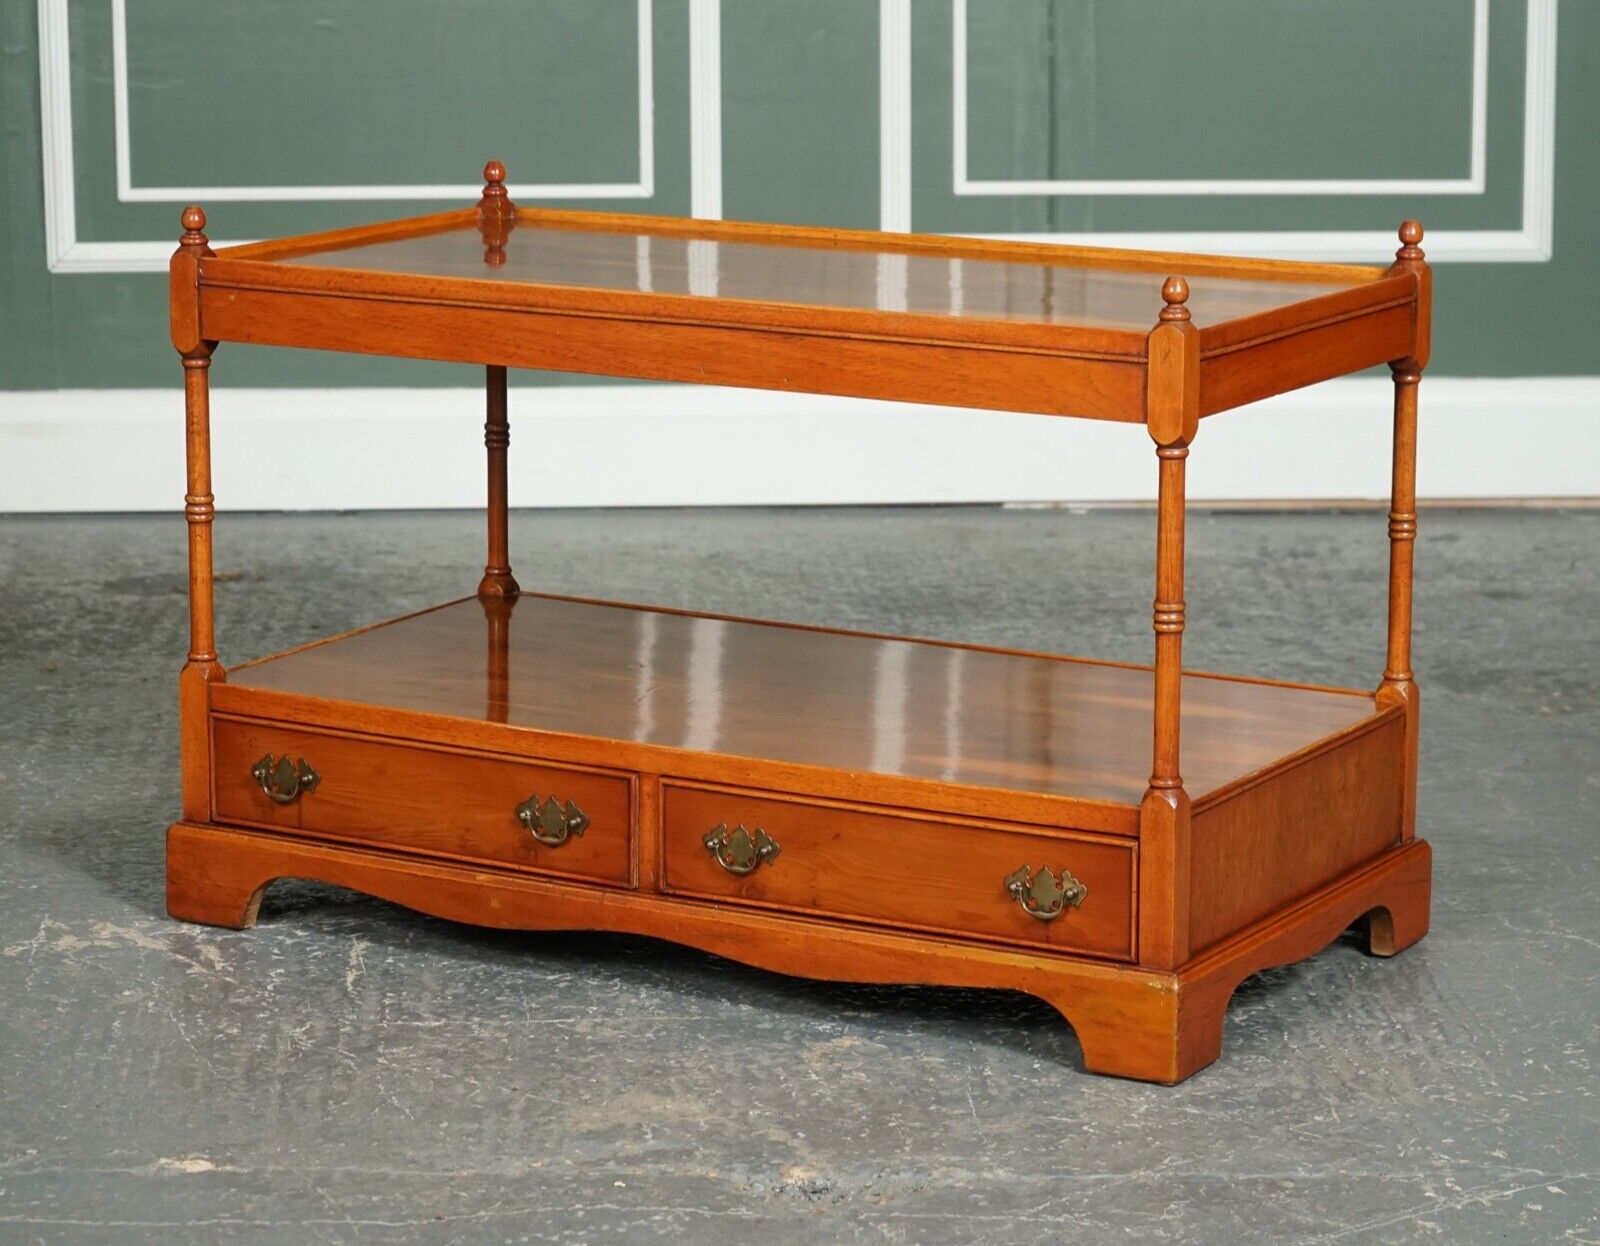 VINTAGE YEW WOOD GEORGIAN STYLE COFFEE TABLE TV STAND WITH TWO DRAWERS